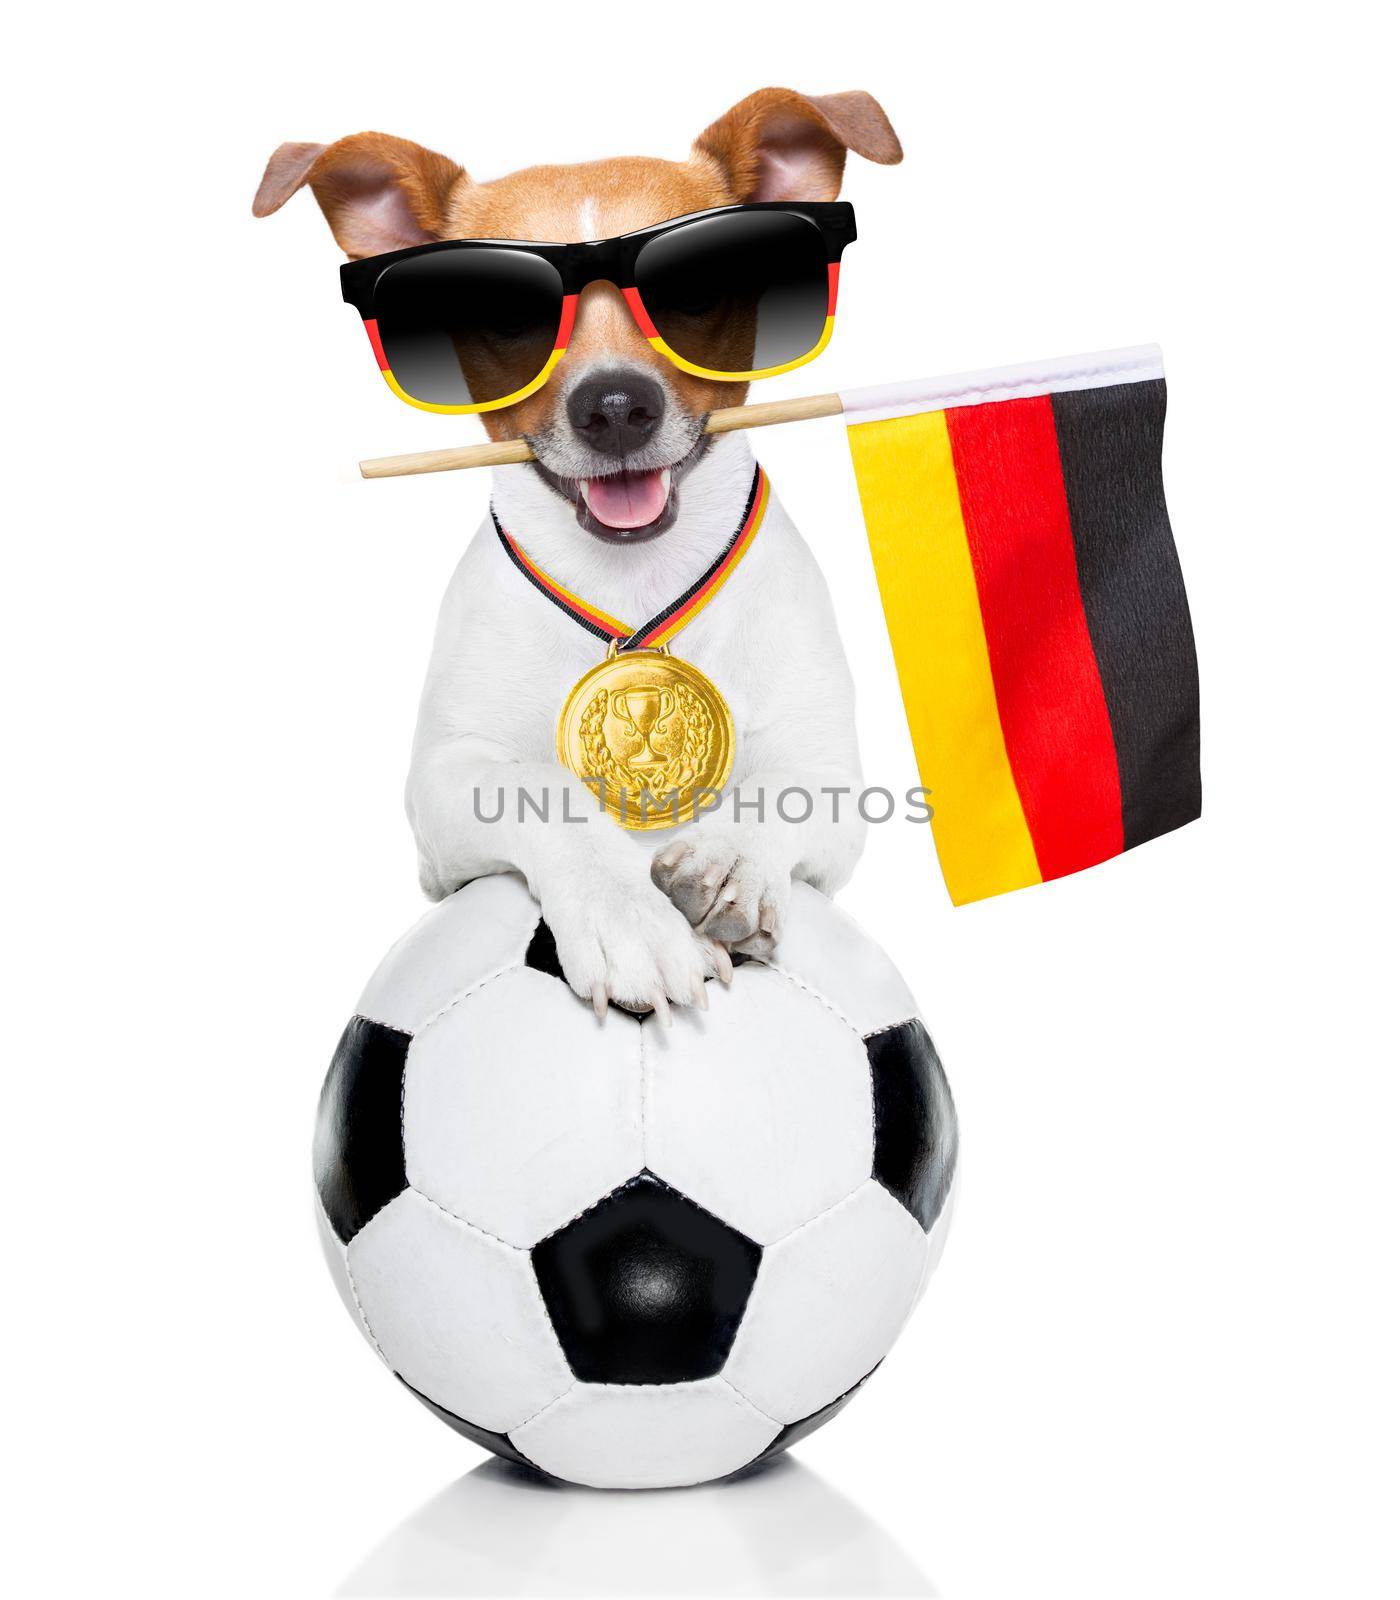 soccer jack russell dog by Brosch